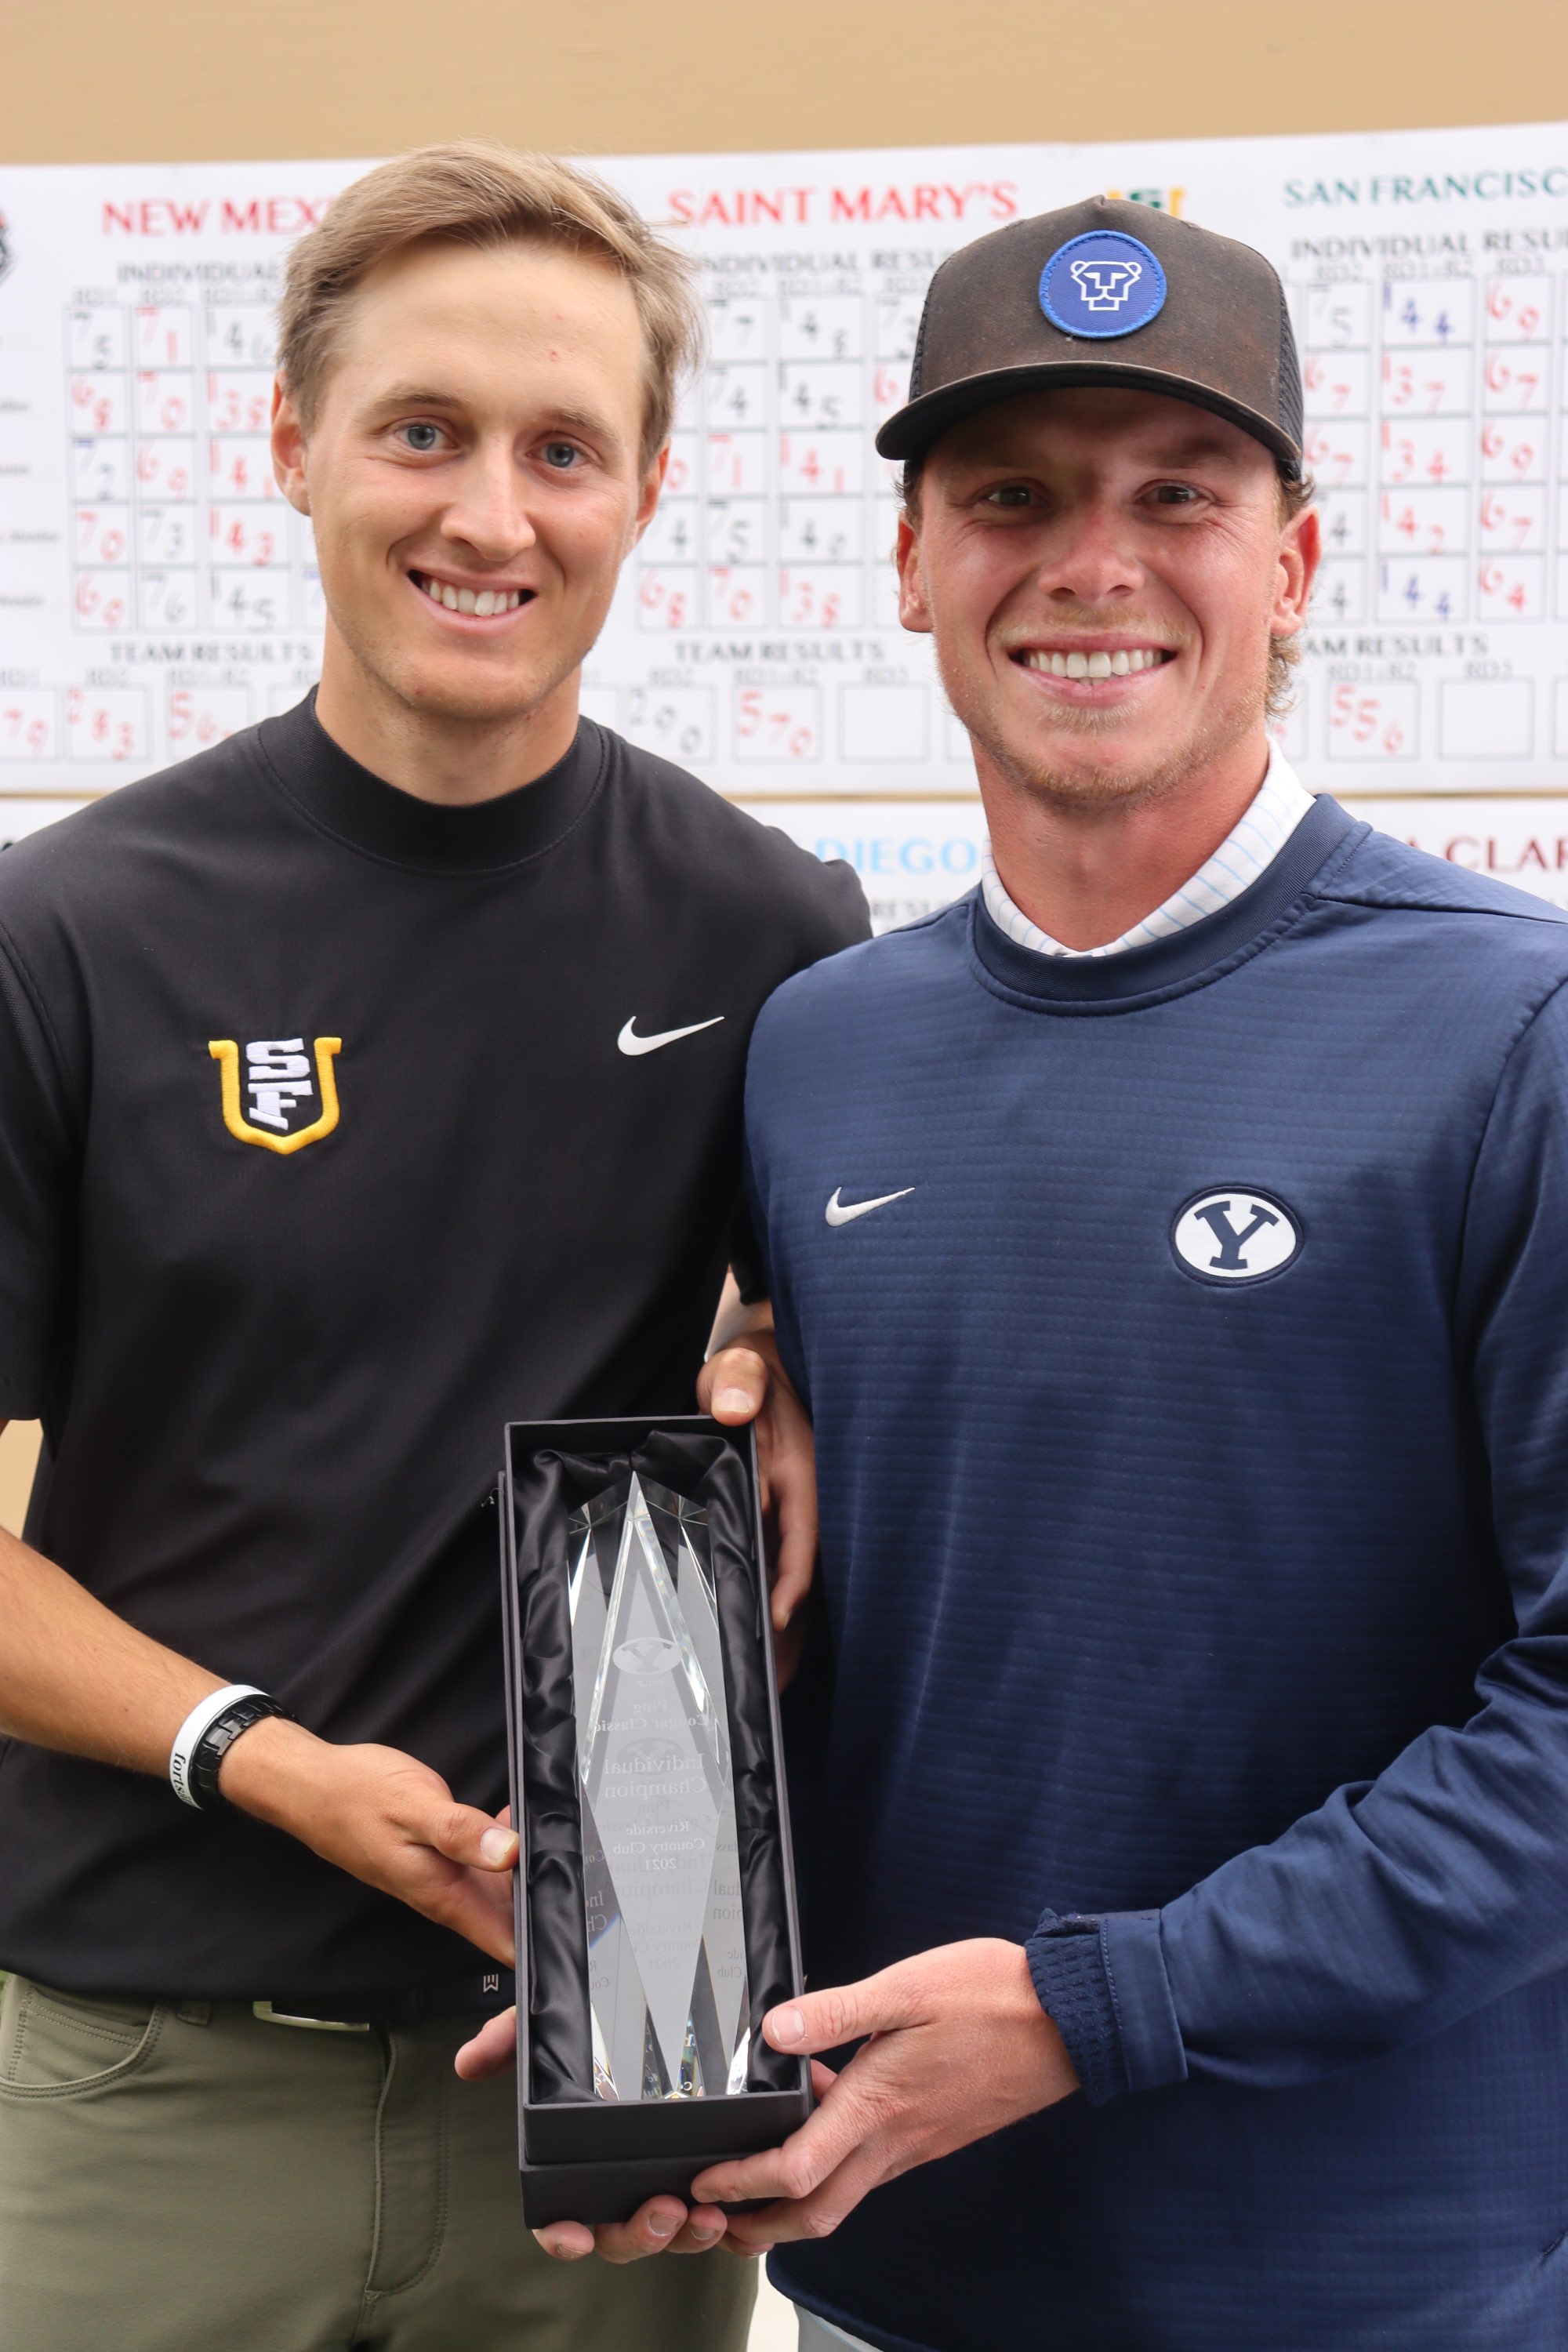 (Left to right) Tim Widing of San Francisco and Carson Lundell of BYU - 2021 Cougar Classic co-champions - credit Fairways Media/Randy Dodson